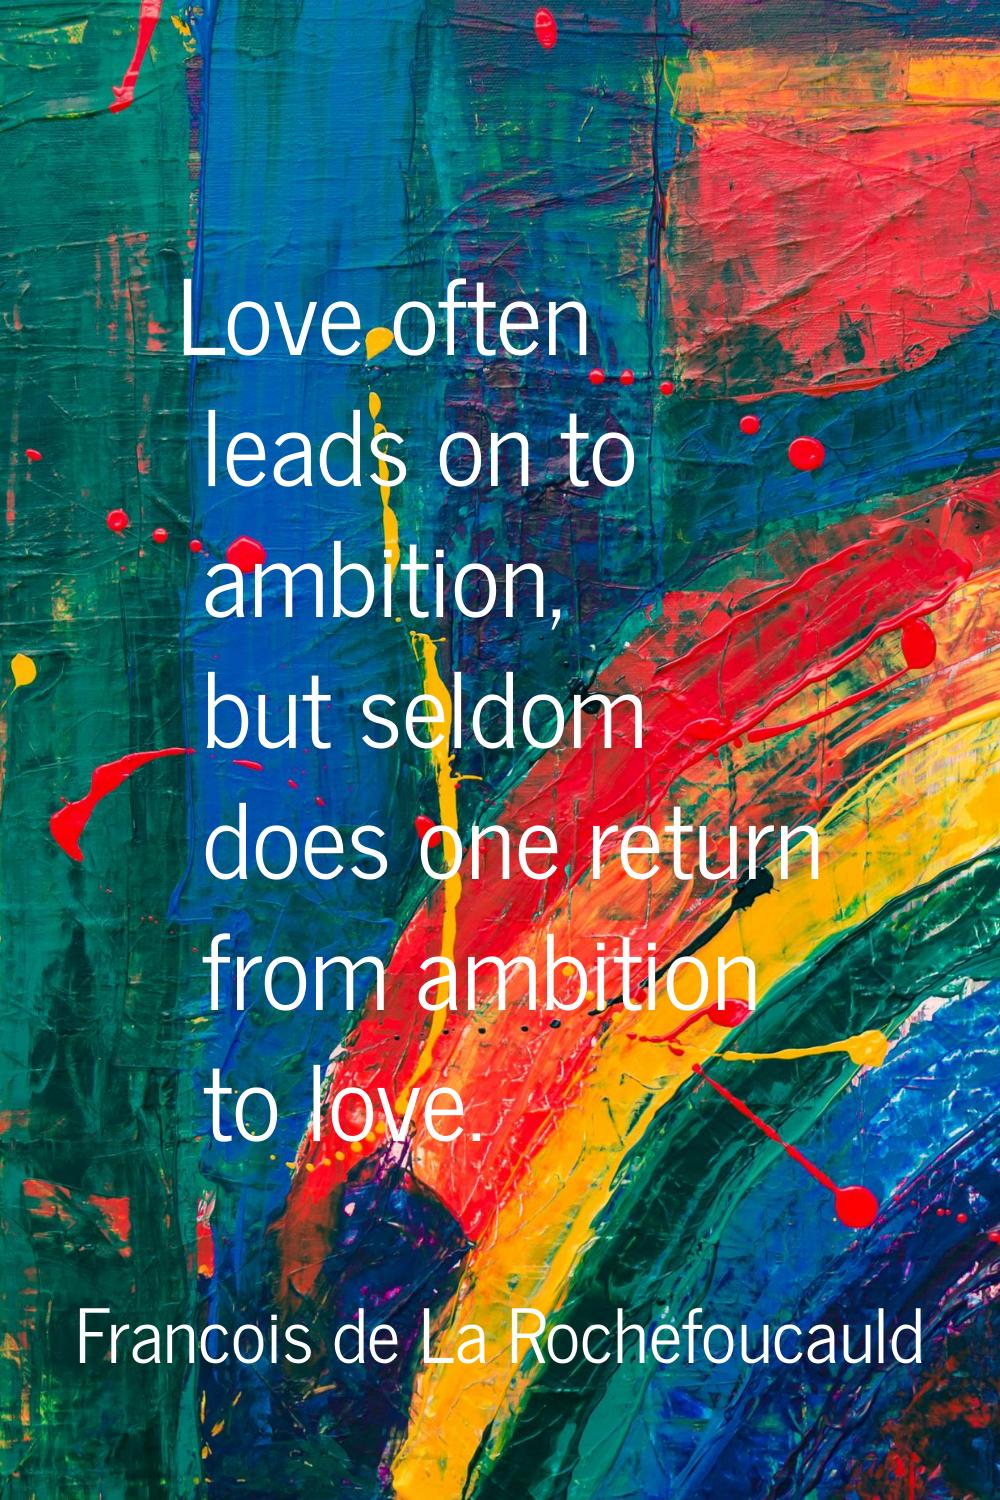 Love often leads on to ambition, but seldom does one return from ambition to love.